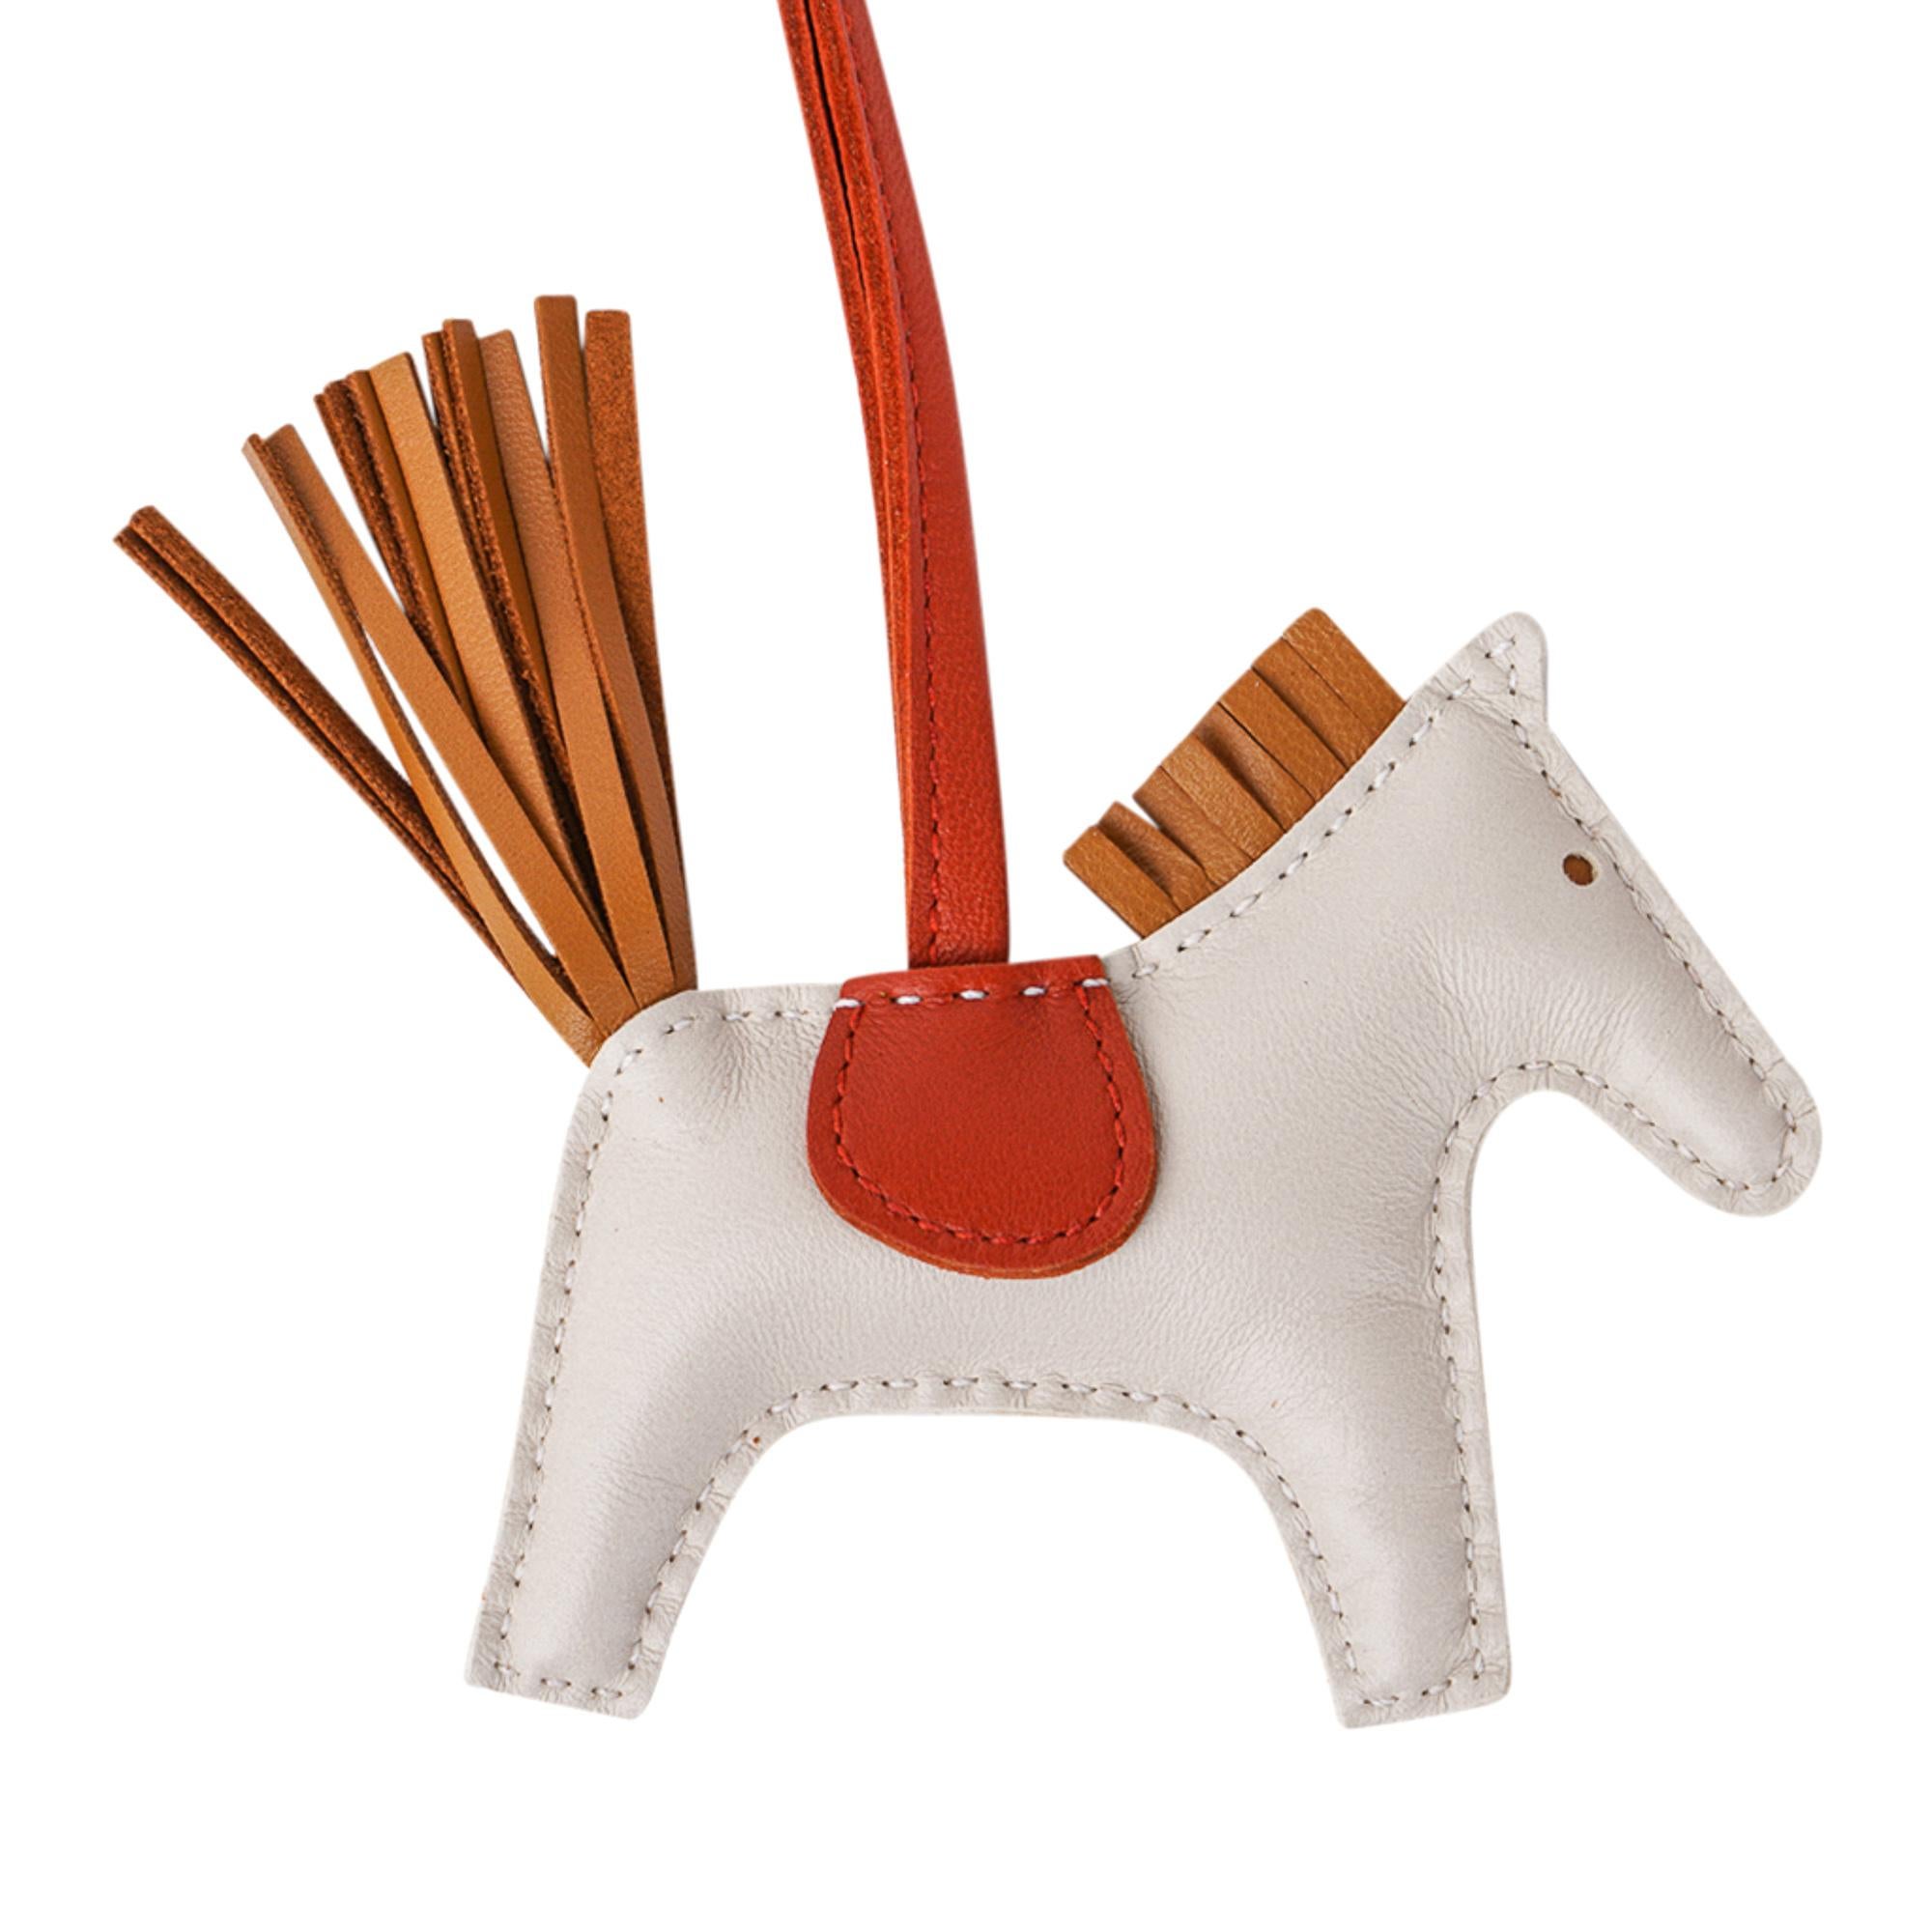 Mightychic offers an Hermes PM Rodeo bag charm featured in Craie, Sesame and Cornaline.
Charming and playful she easily adorns a myriad bag colours in your fabulous collection.
Skin is Milo lambskin.
Signature HERMES PARIS MADE IN FRANCE is stamped